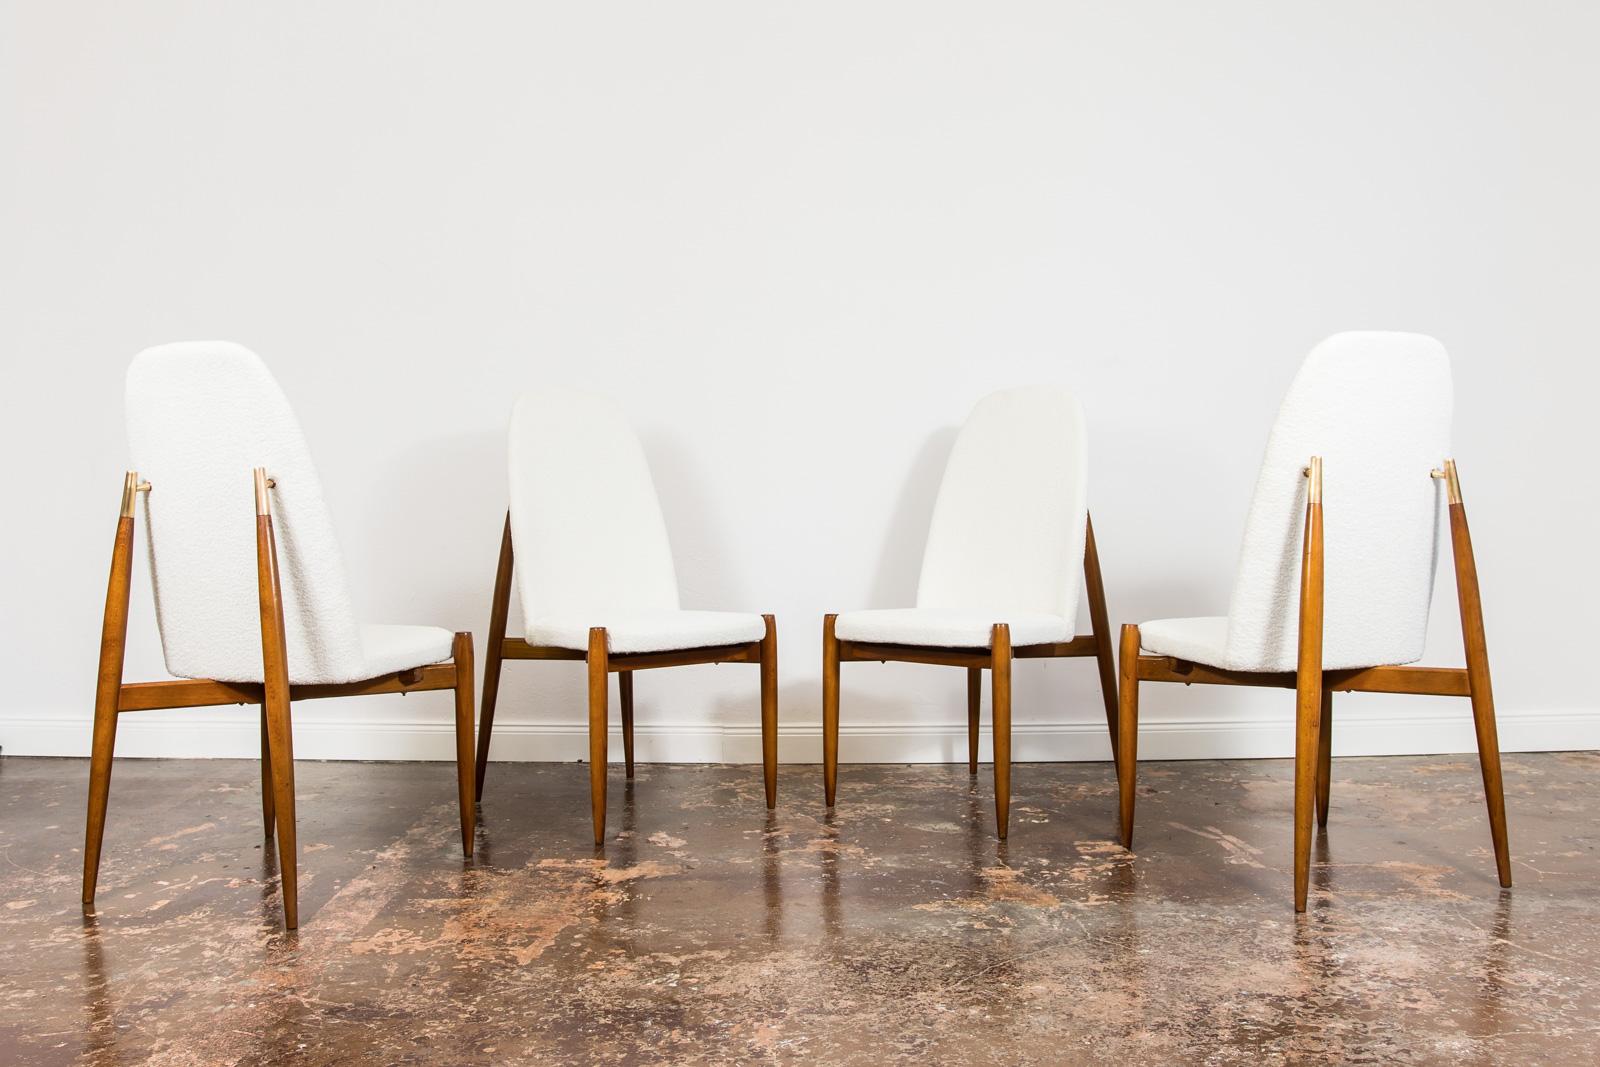 Set of 4 extremely rare chairs designed by Miroslav Navrátil, Czechoslovakia 1950's.
Chairs have been professionally renovated - reupholstered in white boucle type fabric.
Beautiful design in great condition.